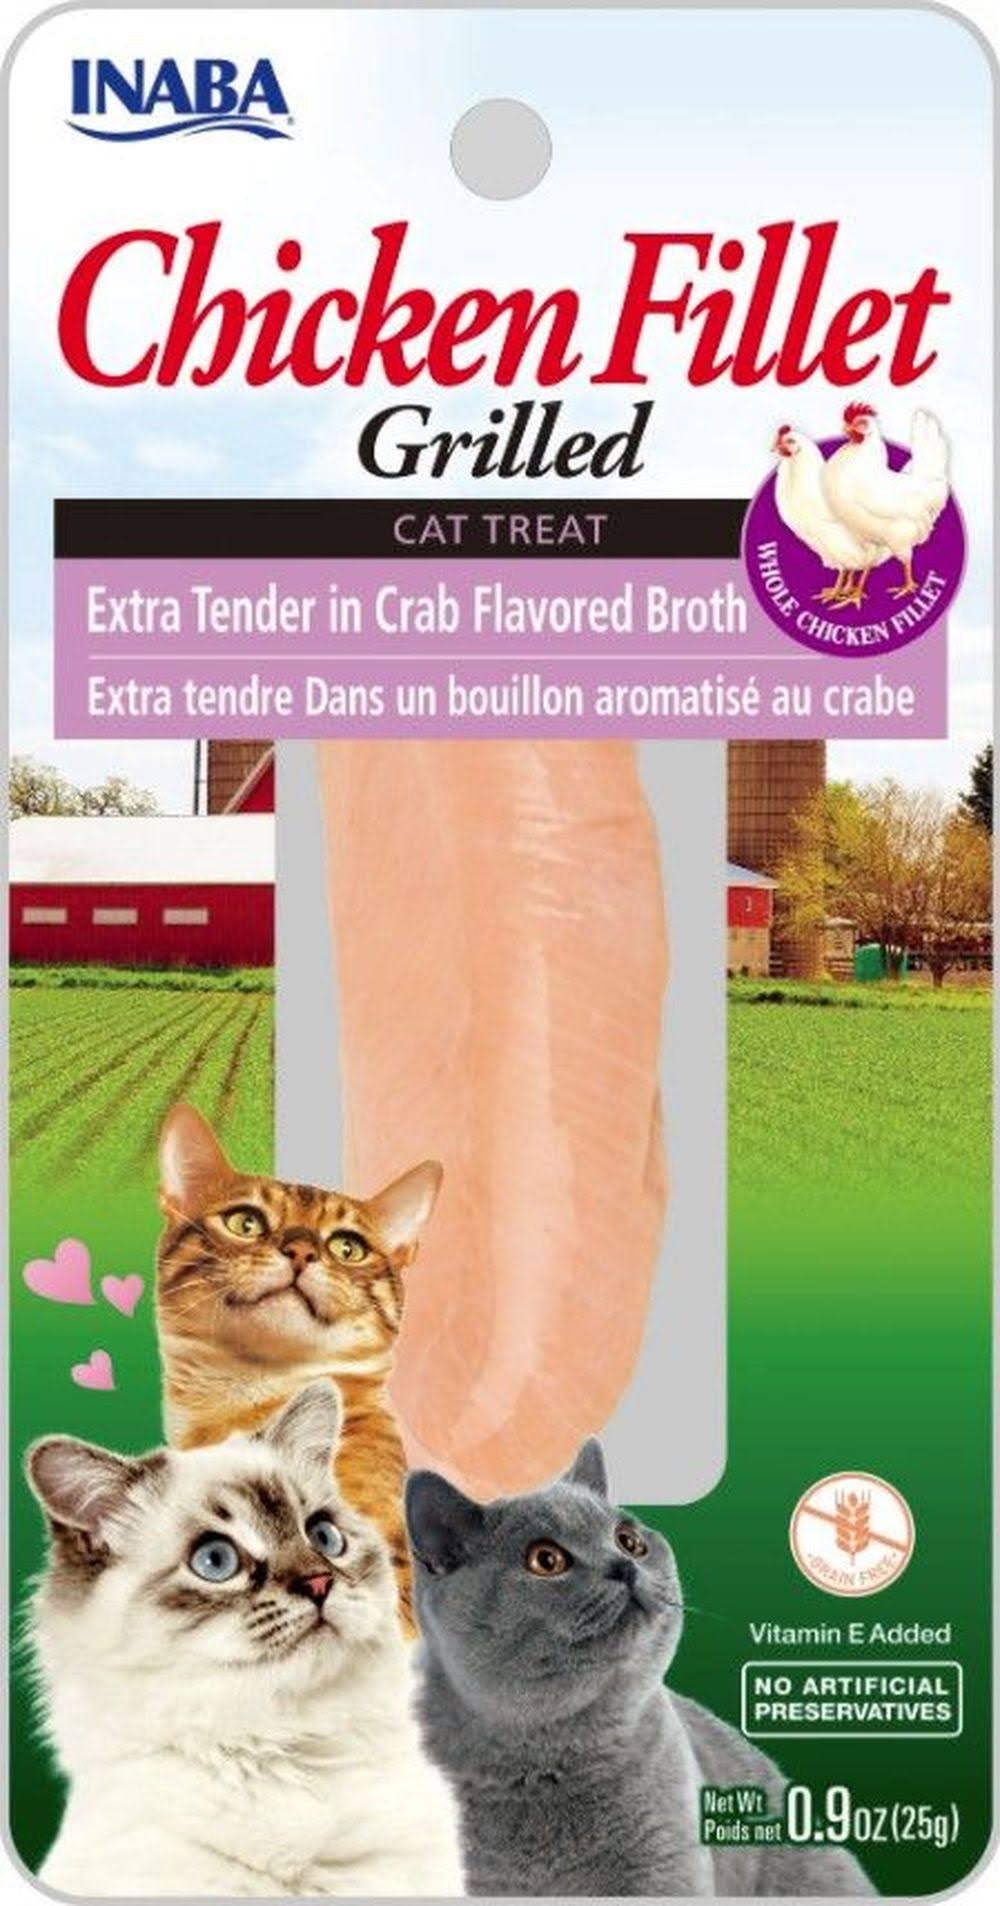 Inaba Chicken Fillet Grilled Cat Treat Extra Tender in Crab Flavored Broth (0.9oz)